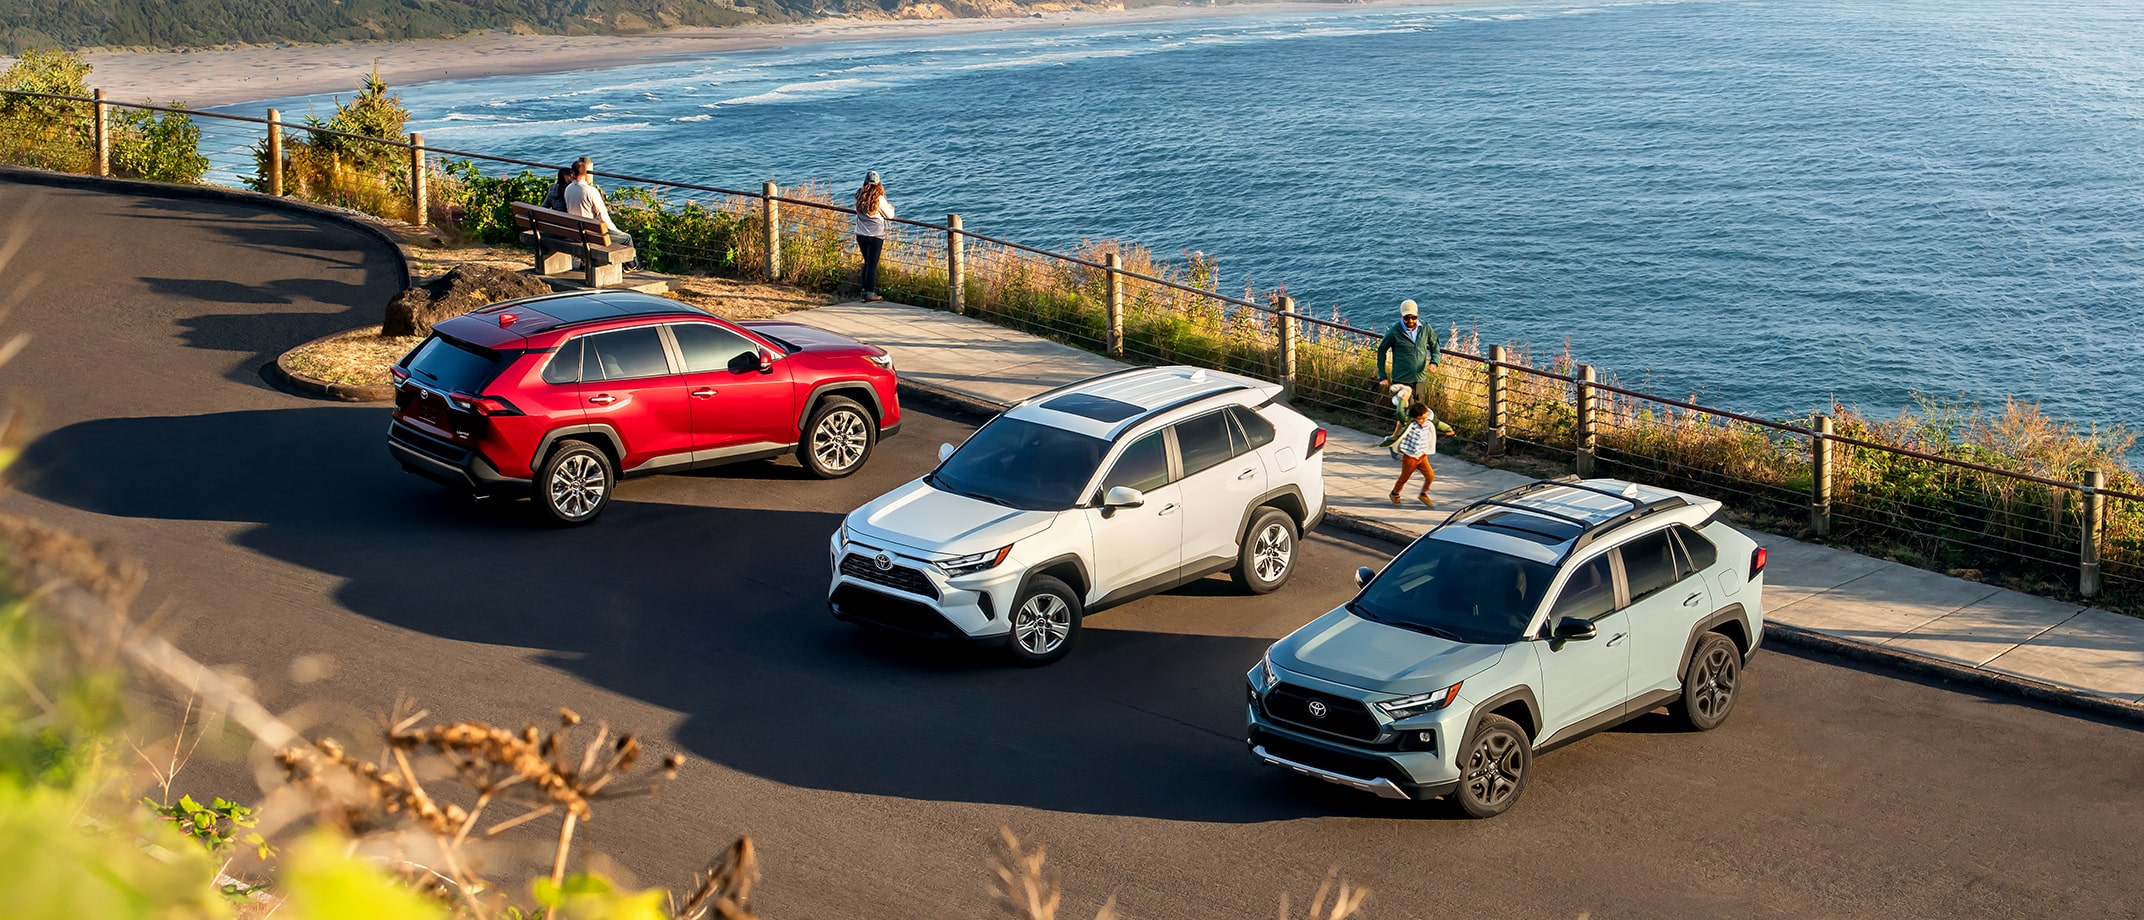 Three Toyota vehicles in the parking lot next to an oceanside viewpoint.